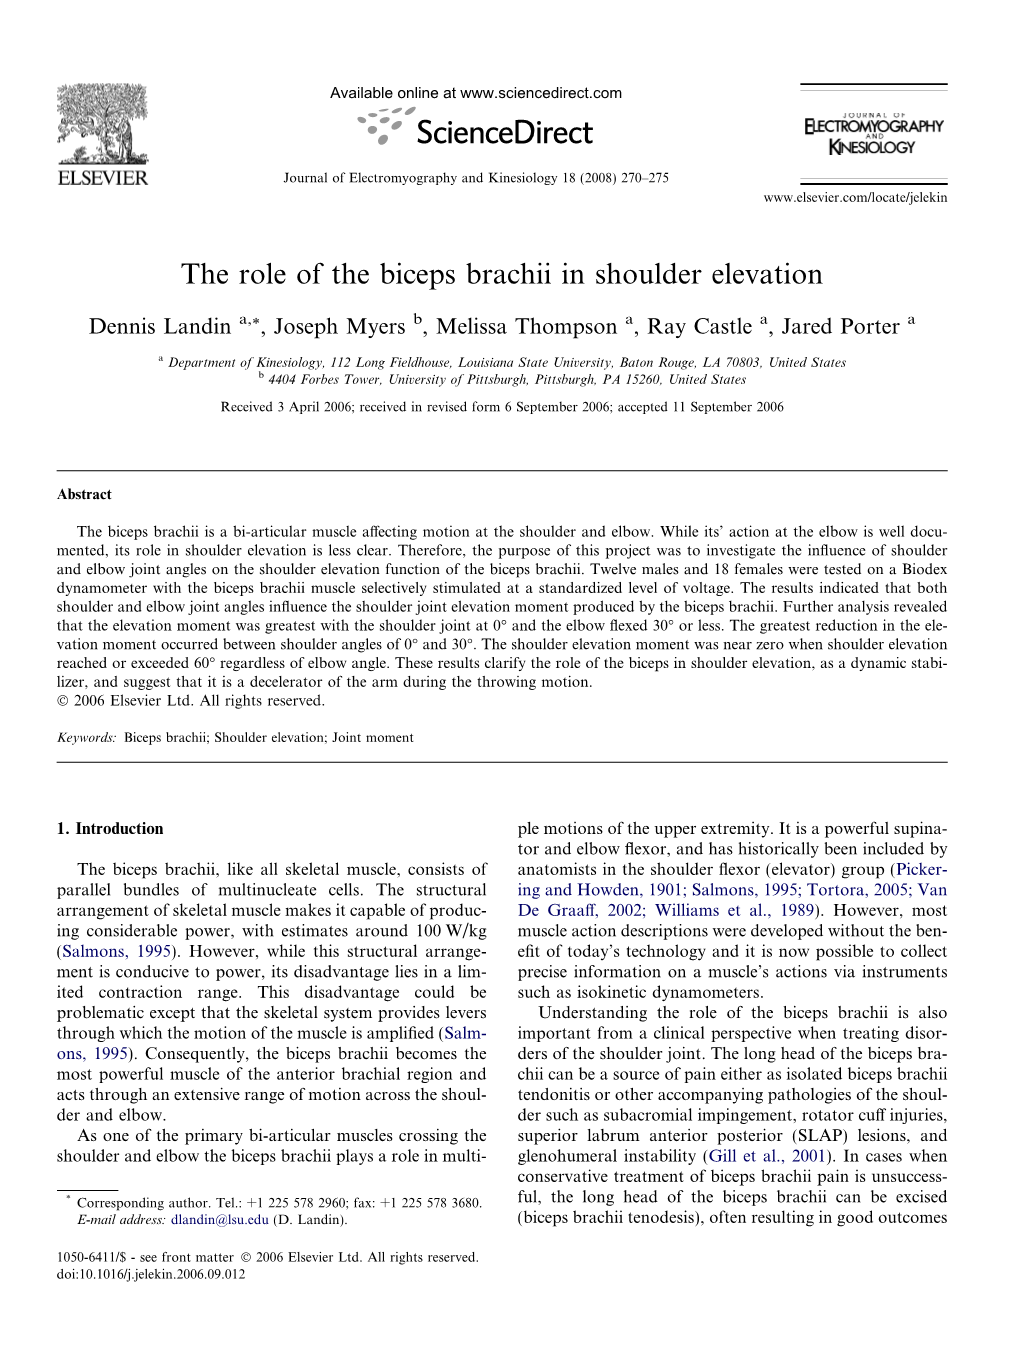 The Role of the Biceps Brachii in Shoulder Elevation